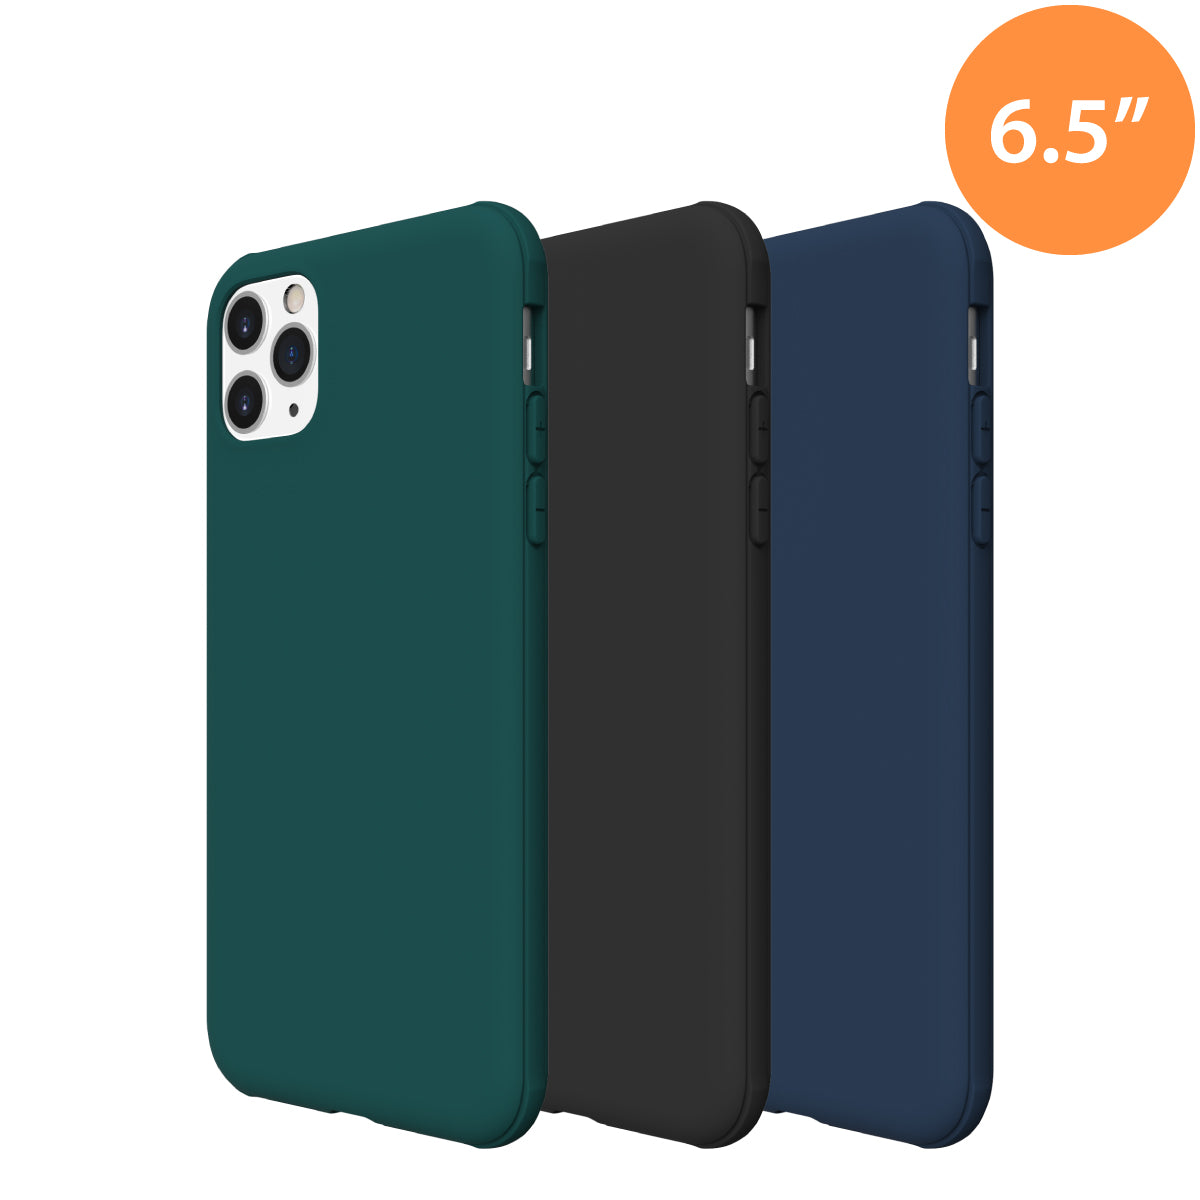 Diana Anti Shock Case For Iphone 11 Pro Max Solide